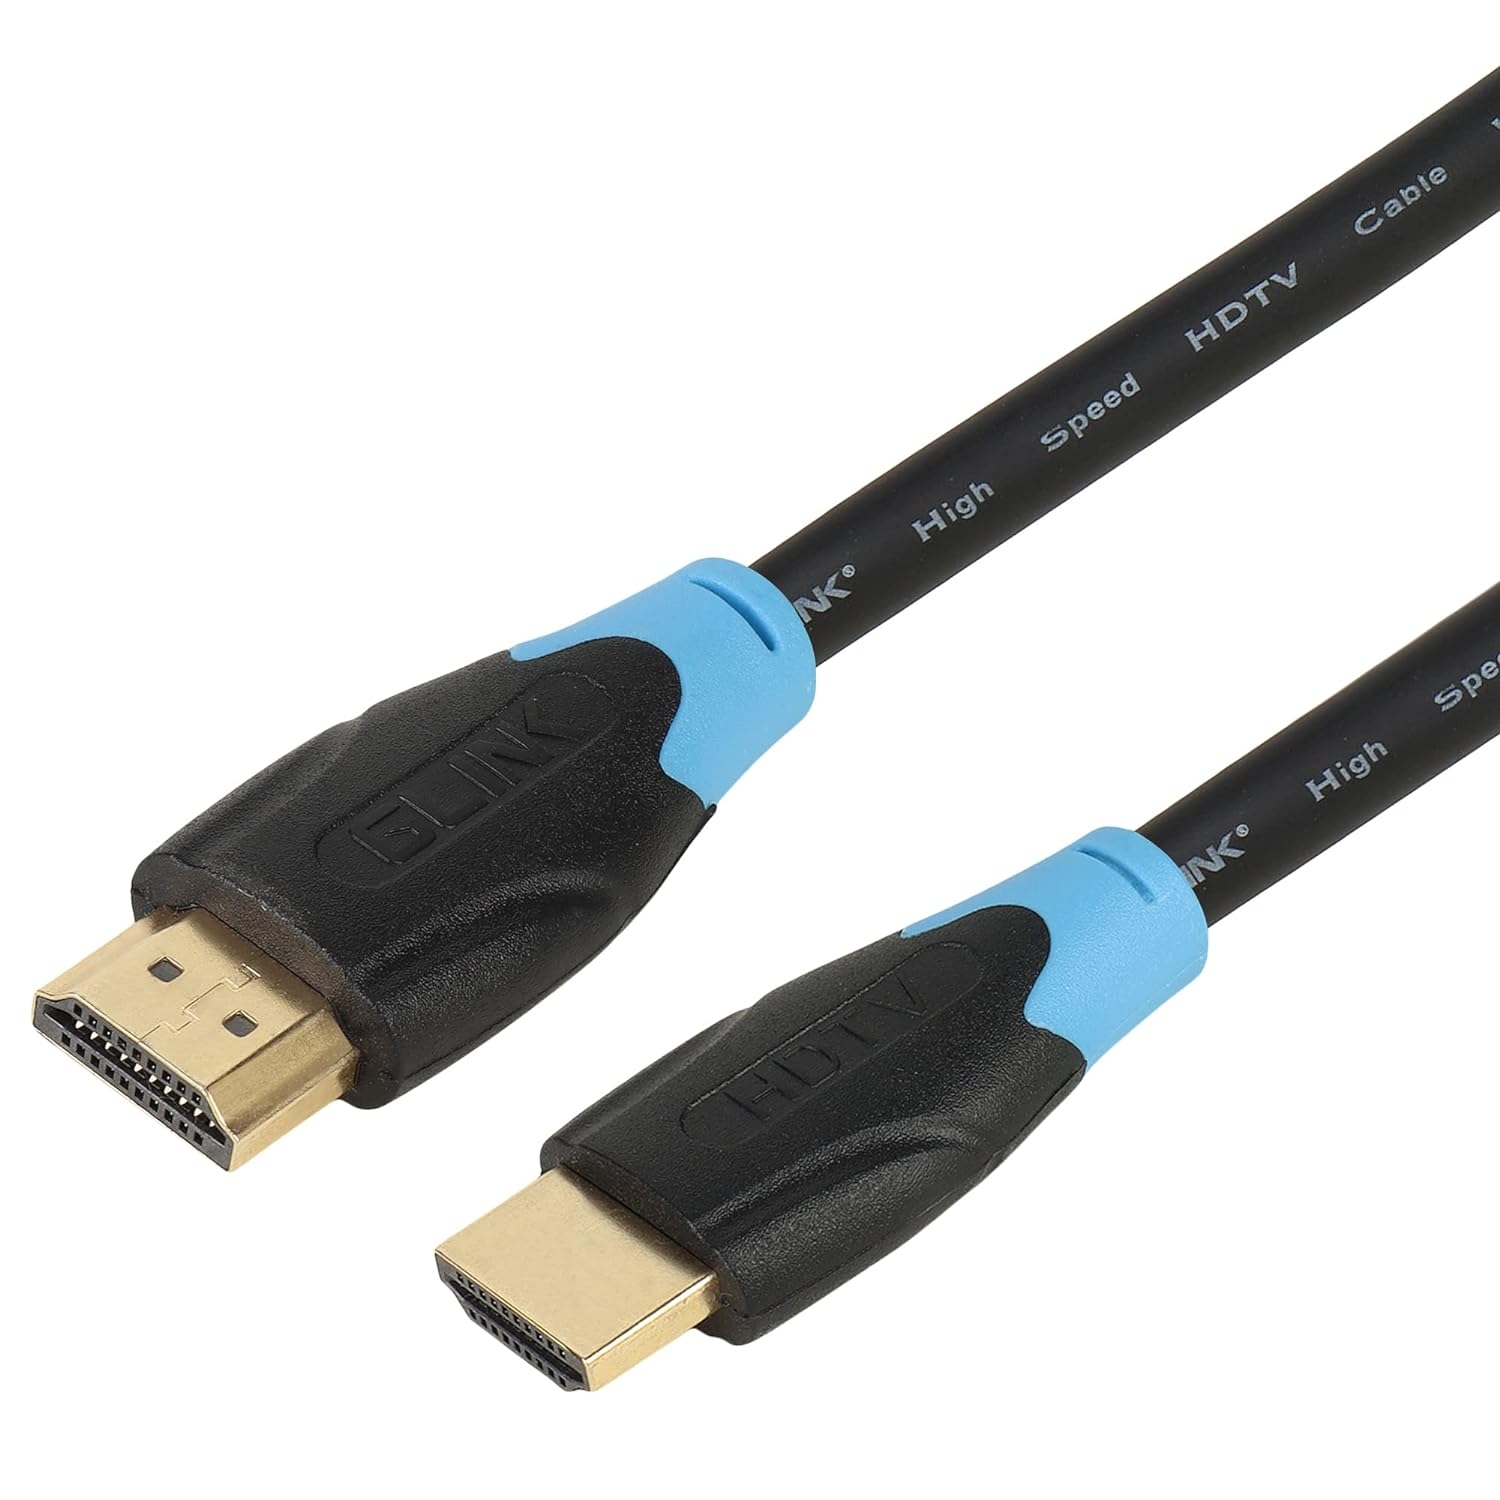 GLink Gold-Plated HDMI Cable (3M. / 9.50 FT.) with ARC Supports Ethernet 1.4V, 3D, 4K video, 1080P, 9.8FT